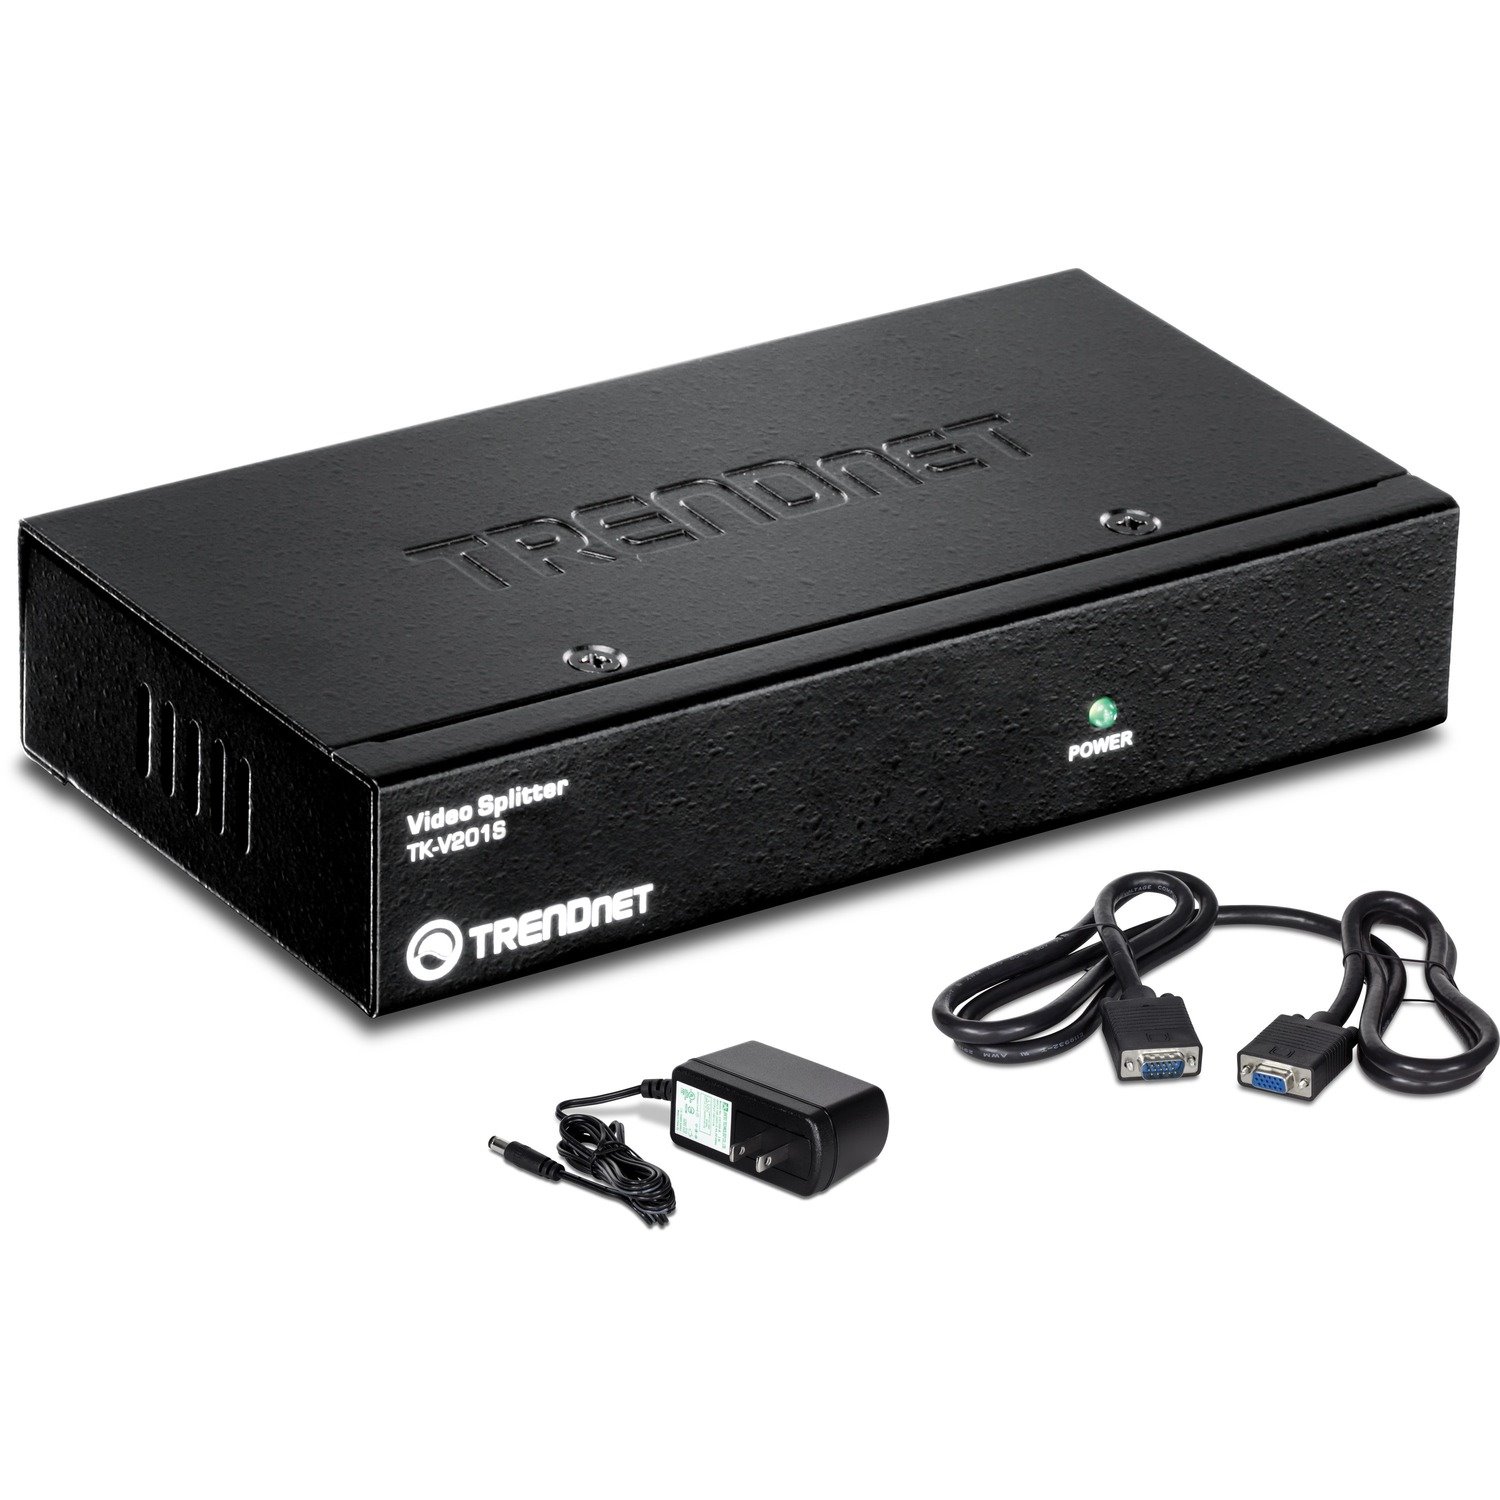 TRENDnet 2-Port Stackable Video Splitter, Video Resolution up to 1920 x 1440, Cascade up to 3 units, Support VGA, SVGA, Multisync Display, TK-V201S